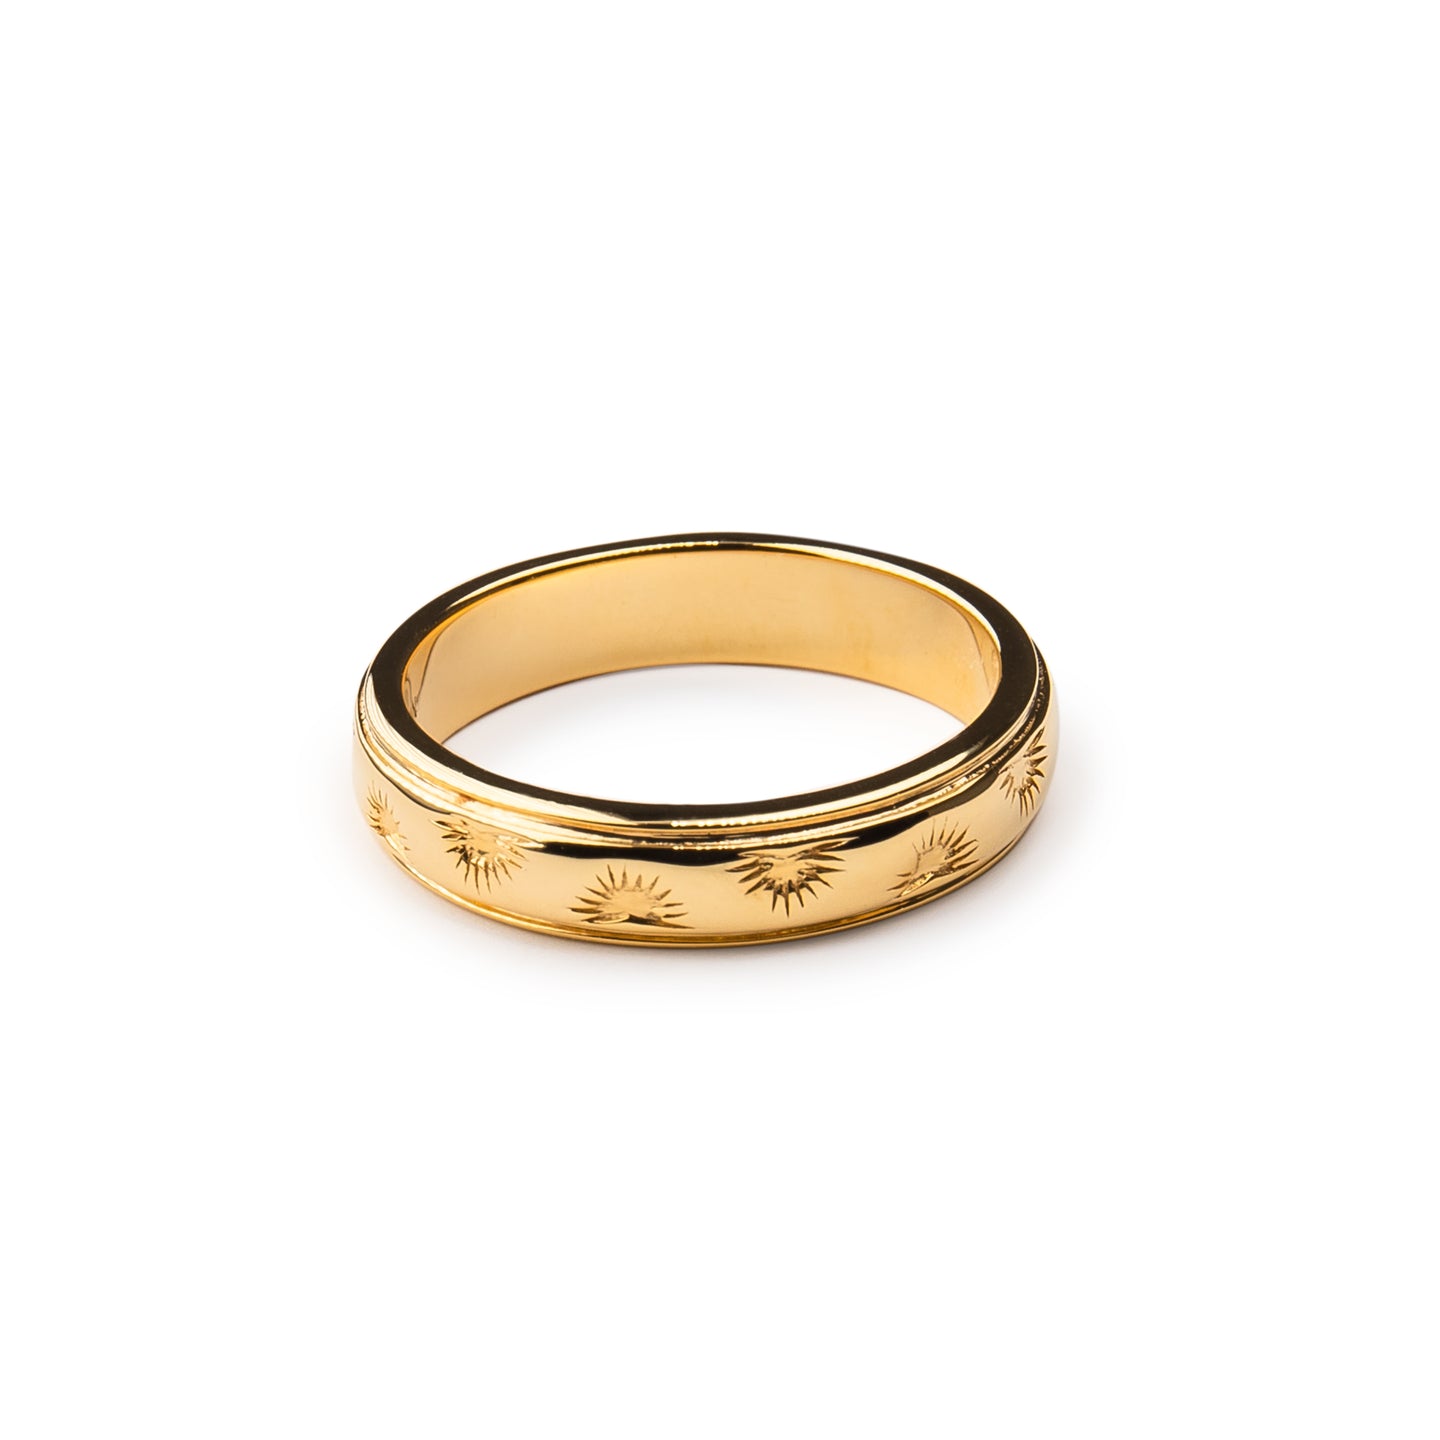 Palm Band Ring in 14K Gold Vermeil